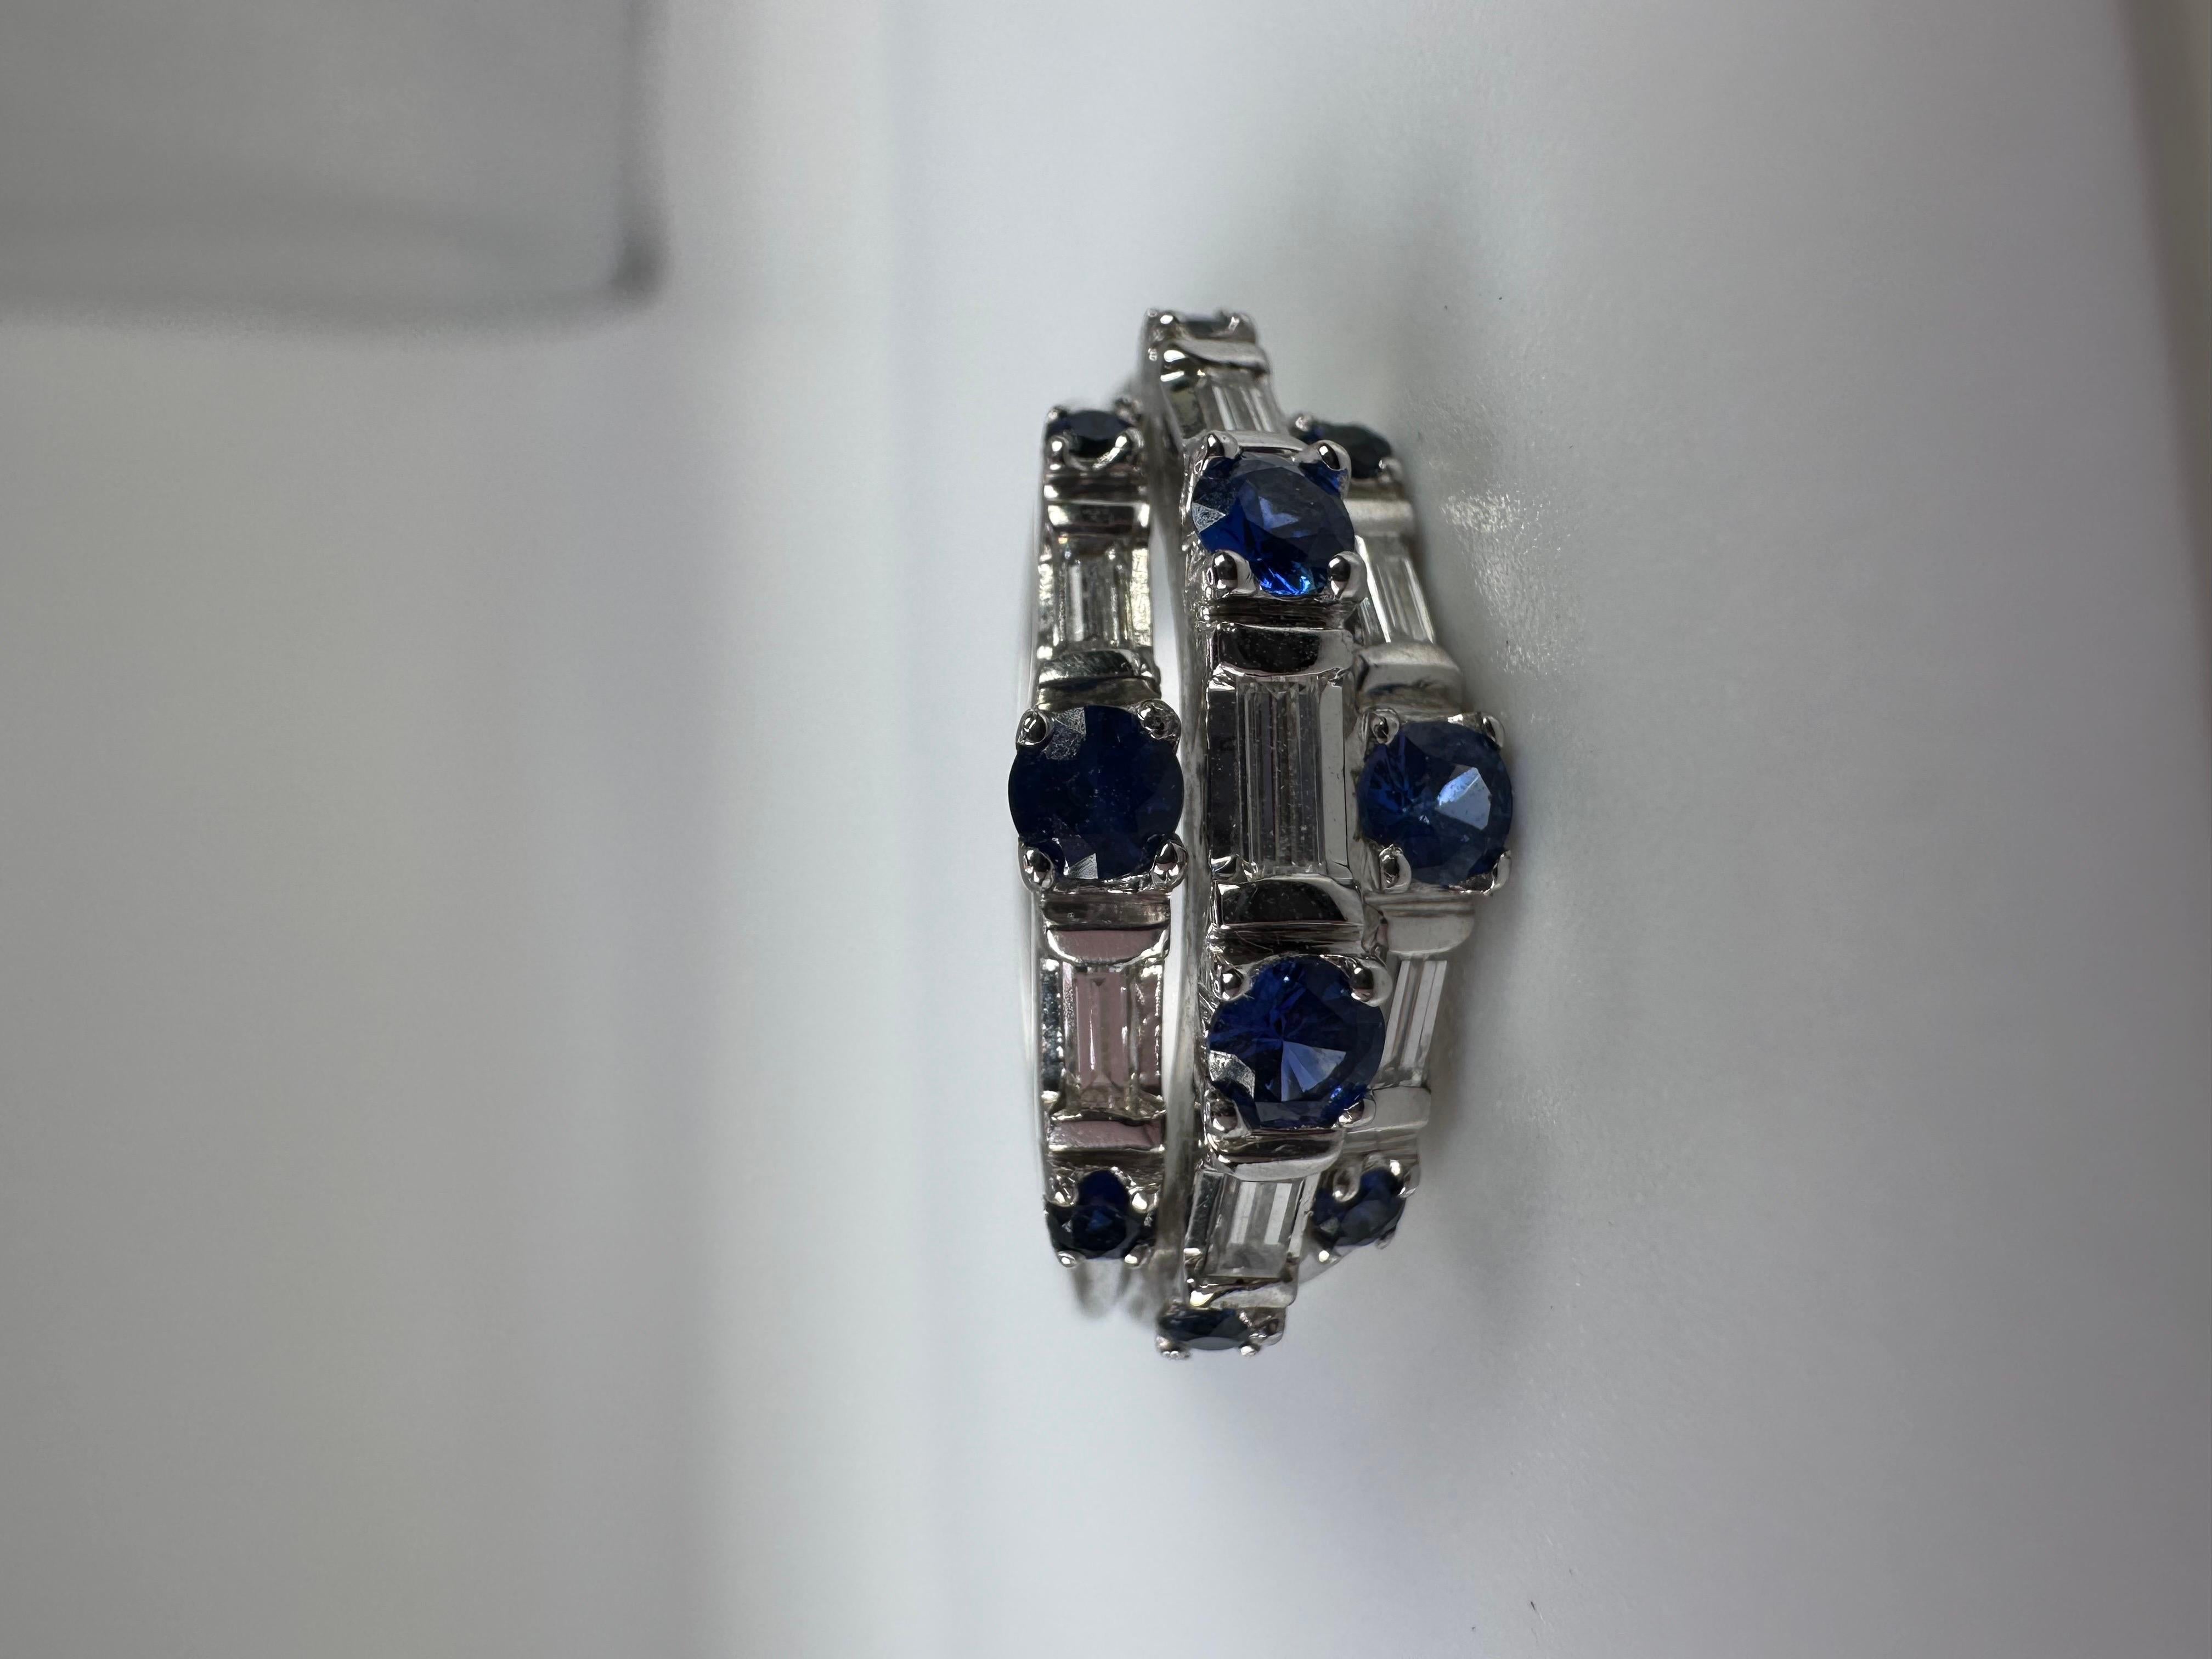 Unique designer ring made with three rows of baguette diamonds and blue sapphires in 14KT white gold.

GOLD: 14KT gold
NATURAL DIAMOND(S)
Clarity/Color: VS/G
Carat:0.46ct
Cut:Baguette
NATURAL SAPPHIRE(S)
Clarity/Color: Slightly